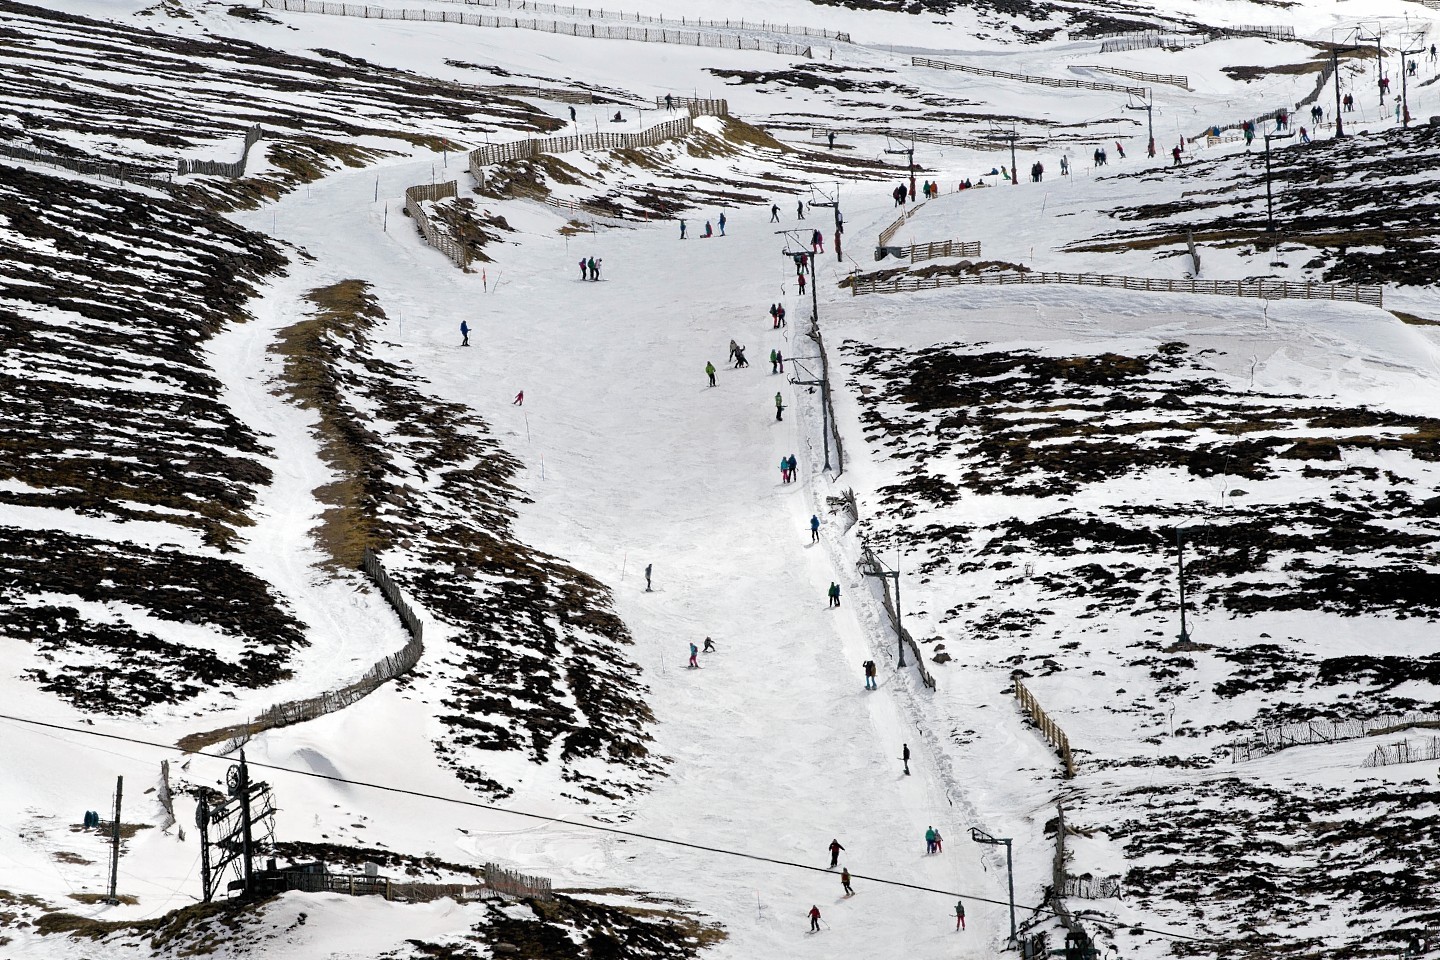 The plans would bring new chairlifts, a mountain coaster and a zipline tour to Cairngorm Mountain.